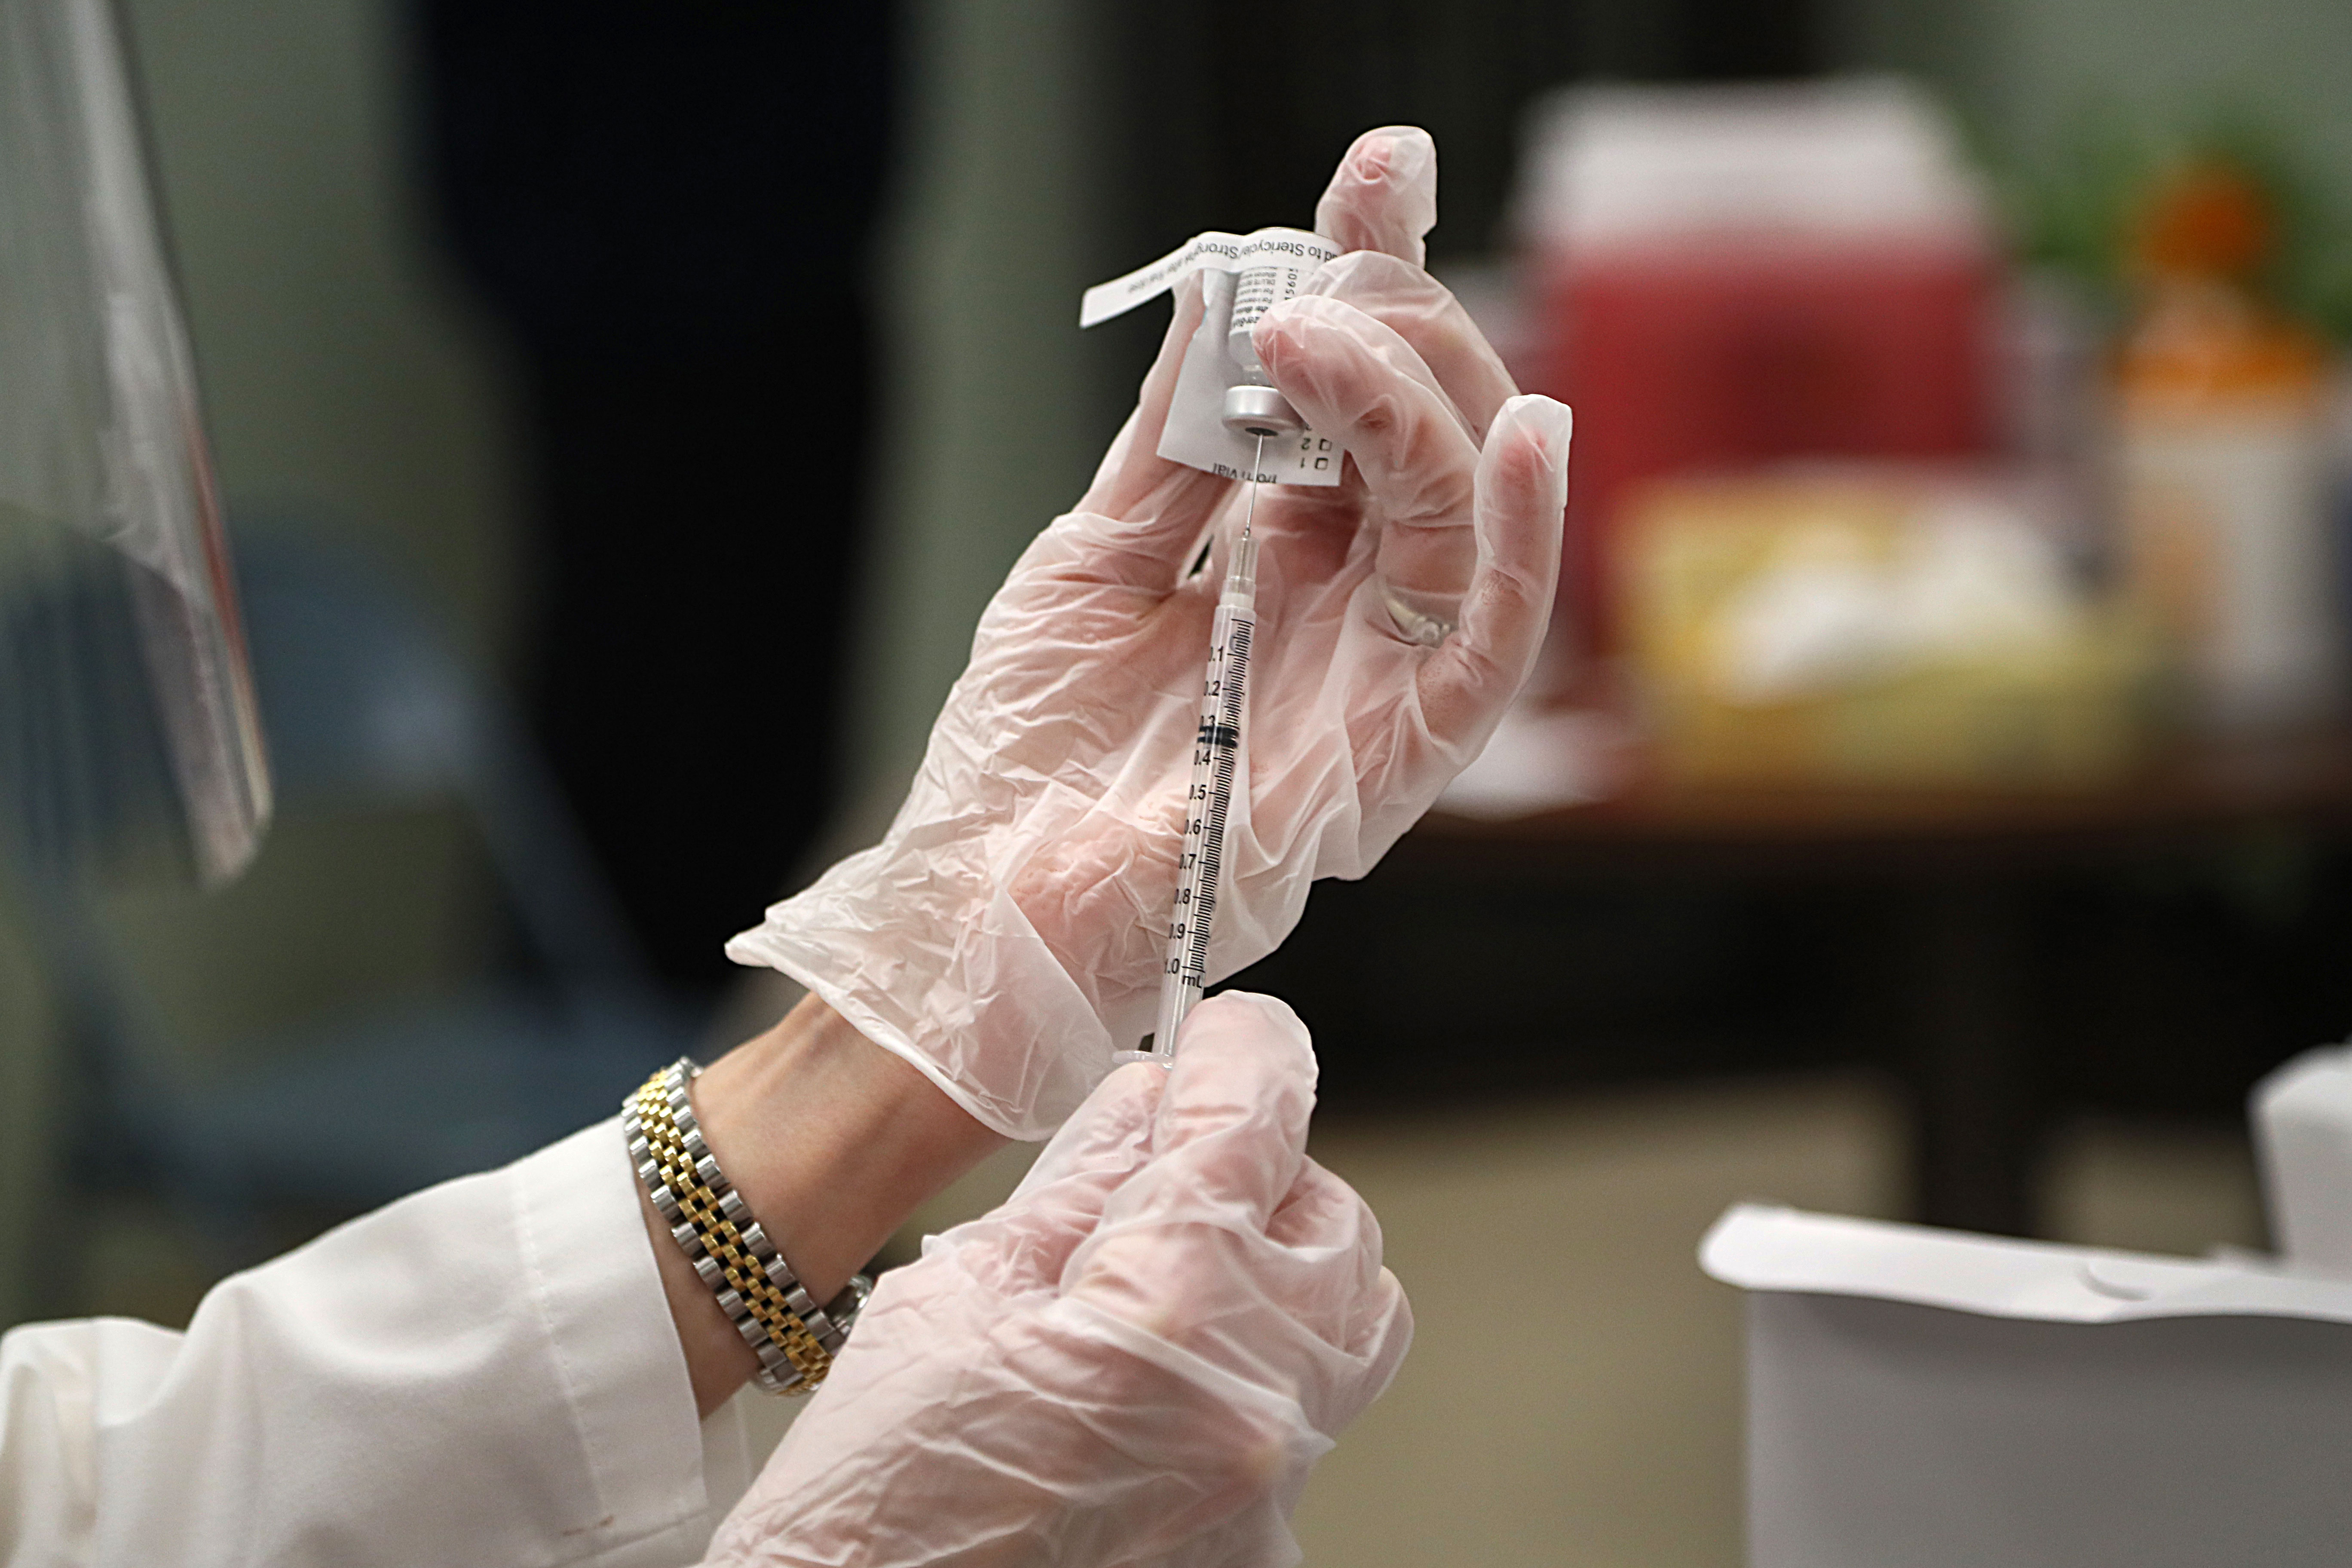 A Pfizer Covid-19 vaccine is prepared for staff at a skilled nursing and rehabilitation center in Acton, Massachusetts, on December 28.